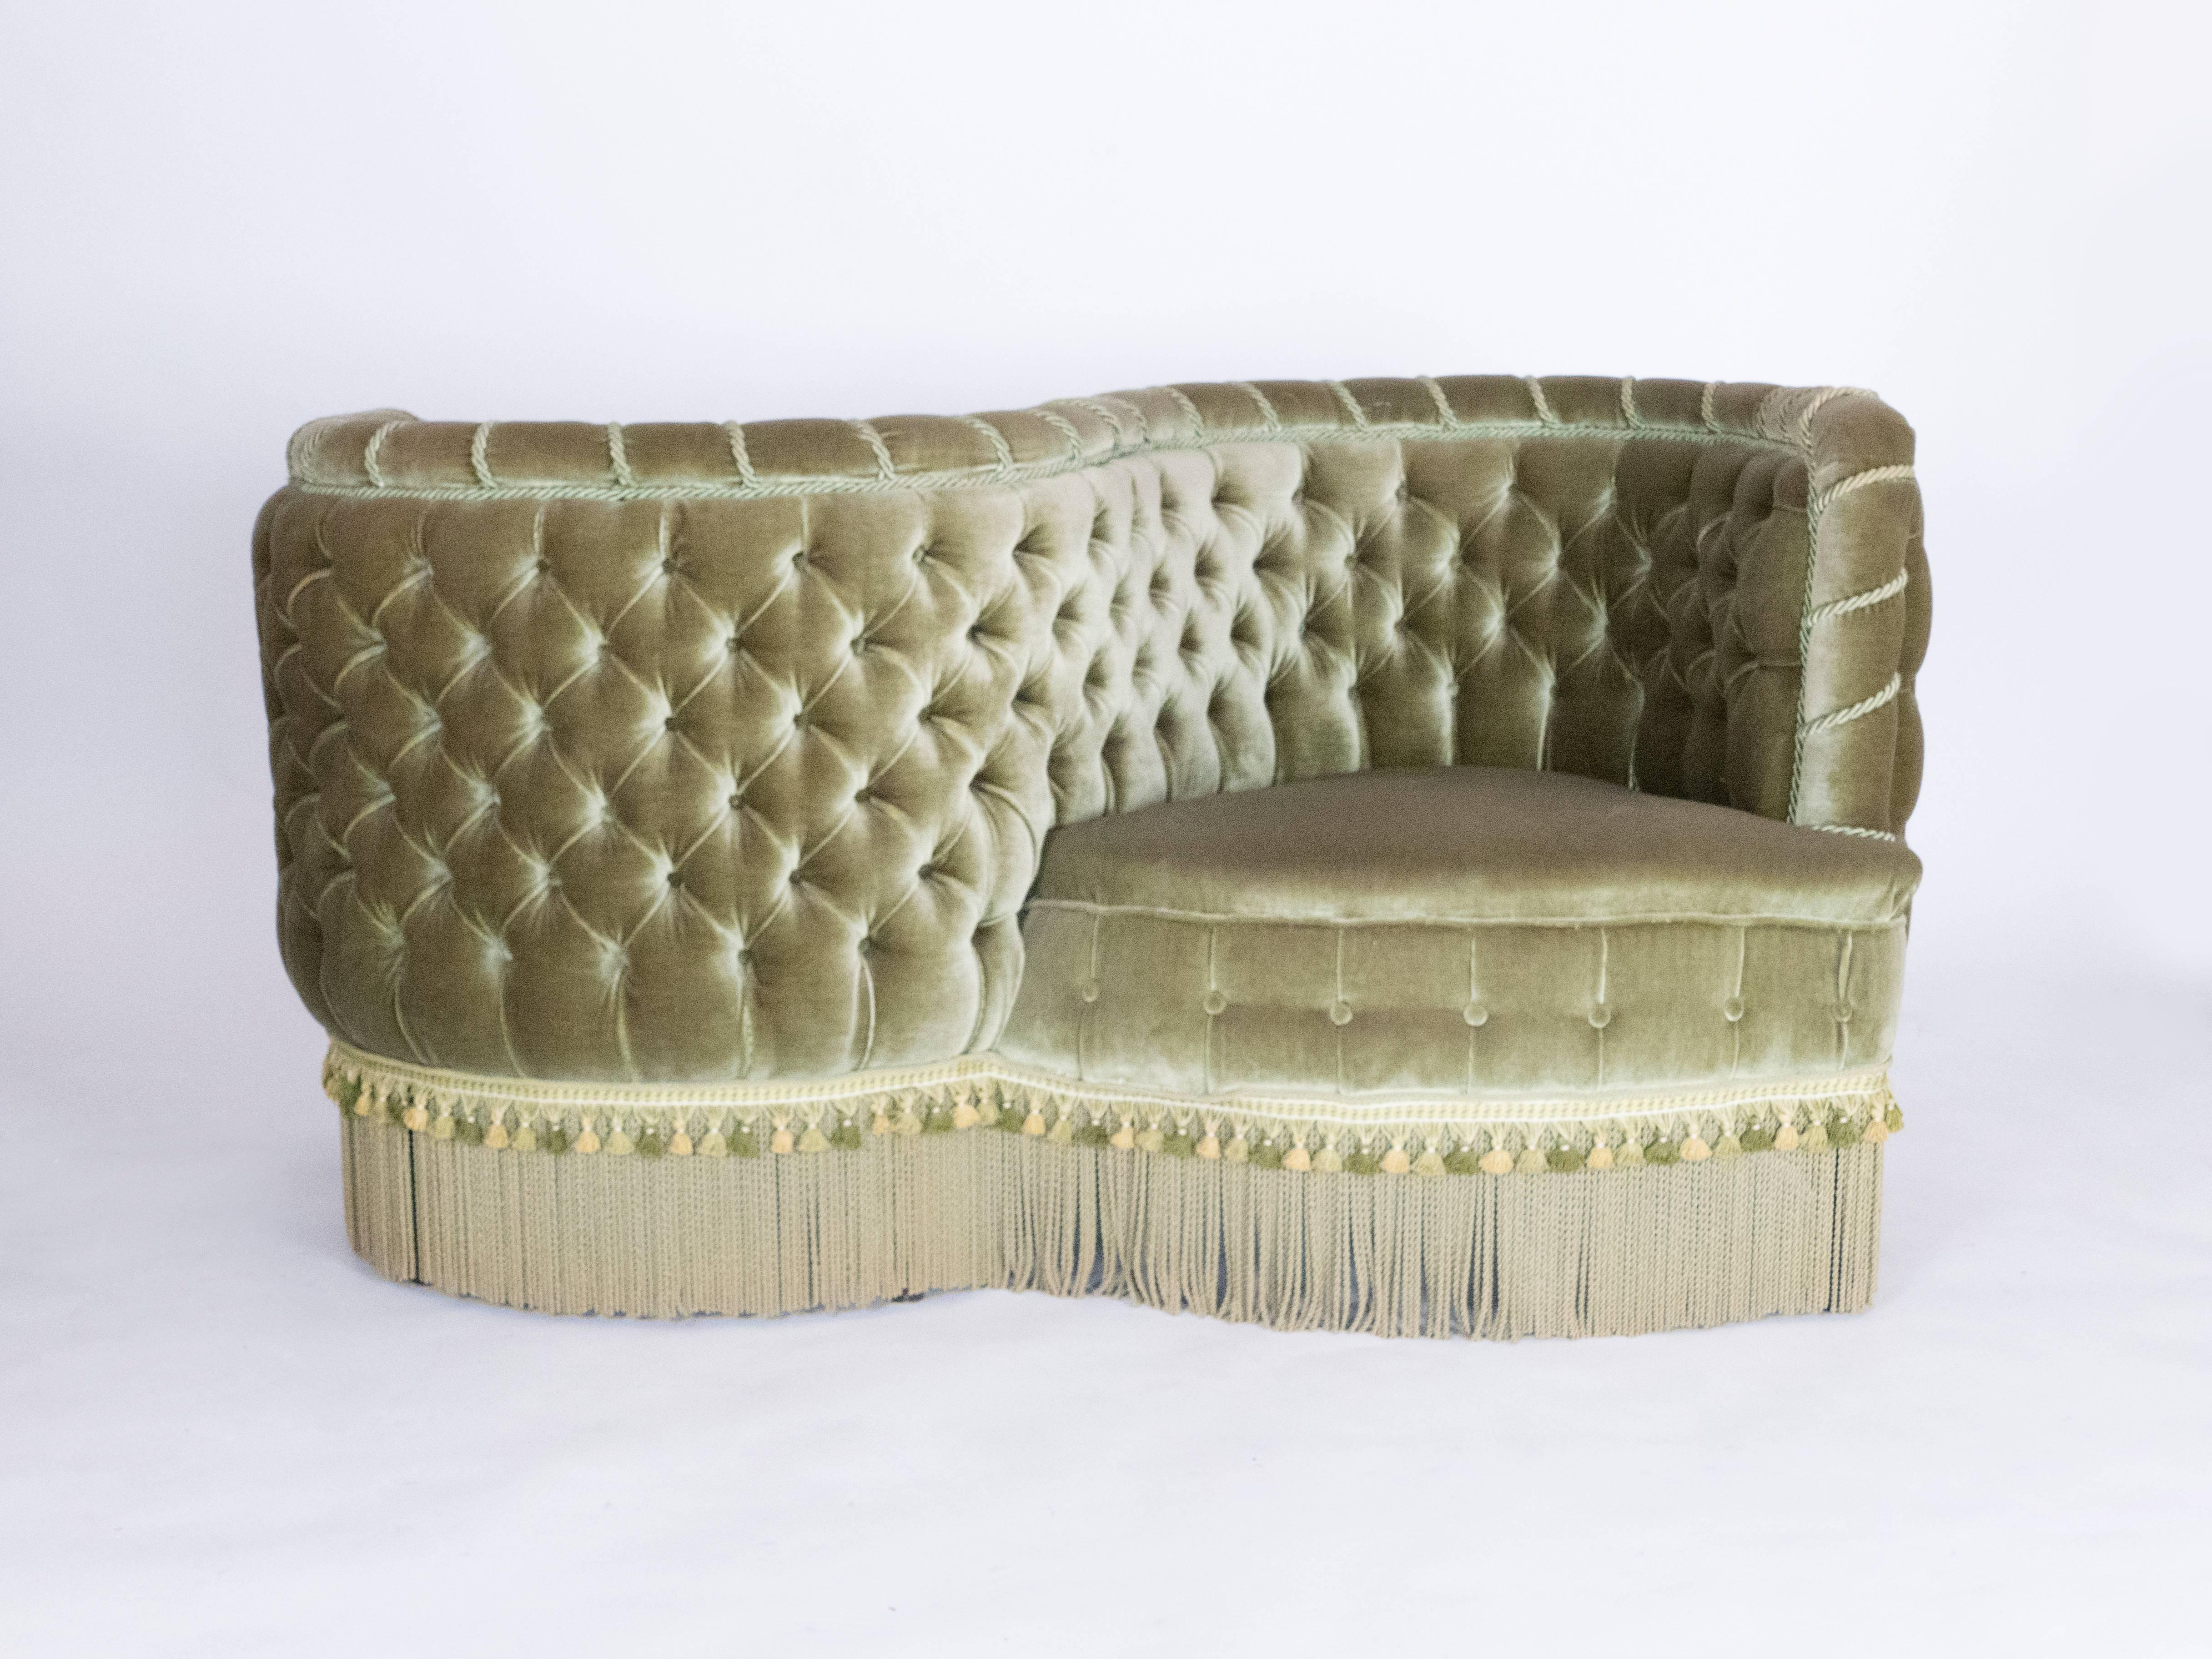 This emblematic piece from the Napoleon III era of furniture is a real treasure. It is in great shape. Has had a recent upholstery job, but it has been done with respect to the original stylings of the era. The tufting is in perfect shape, the frame